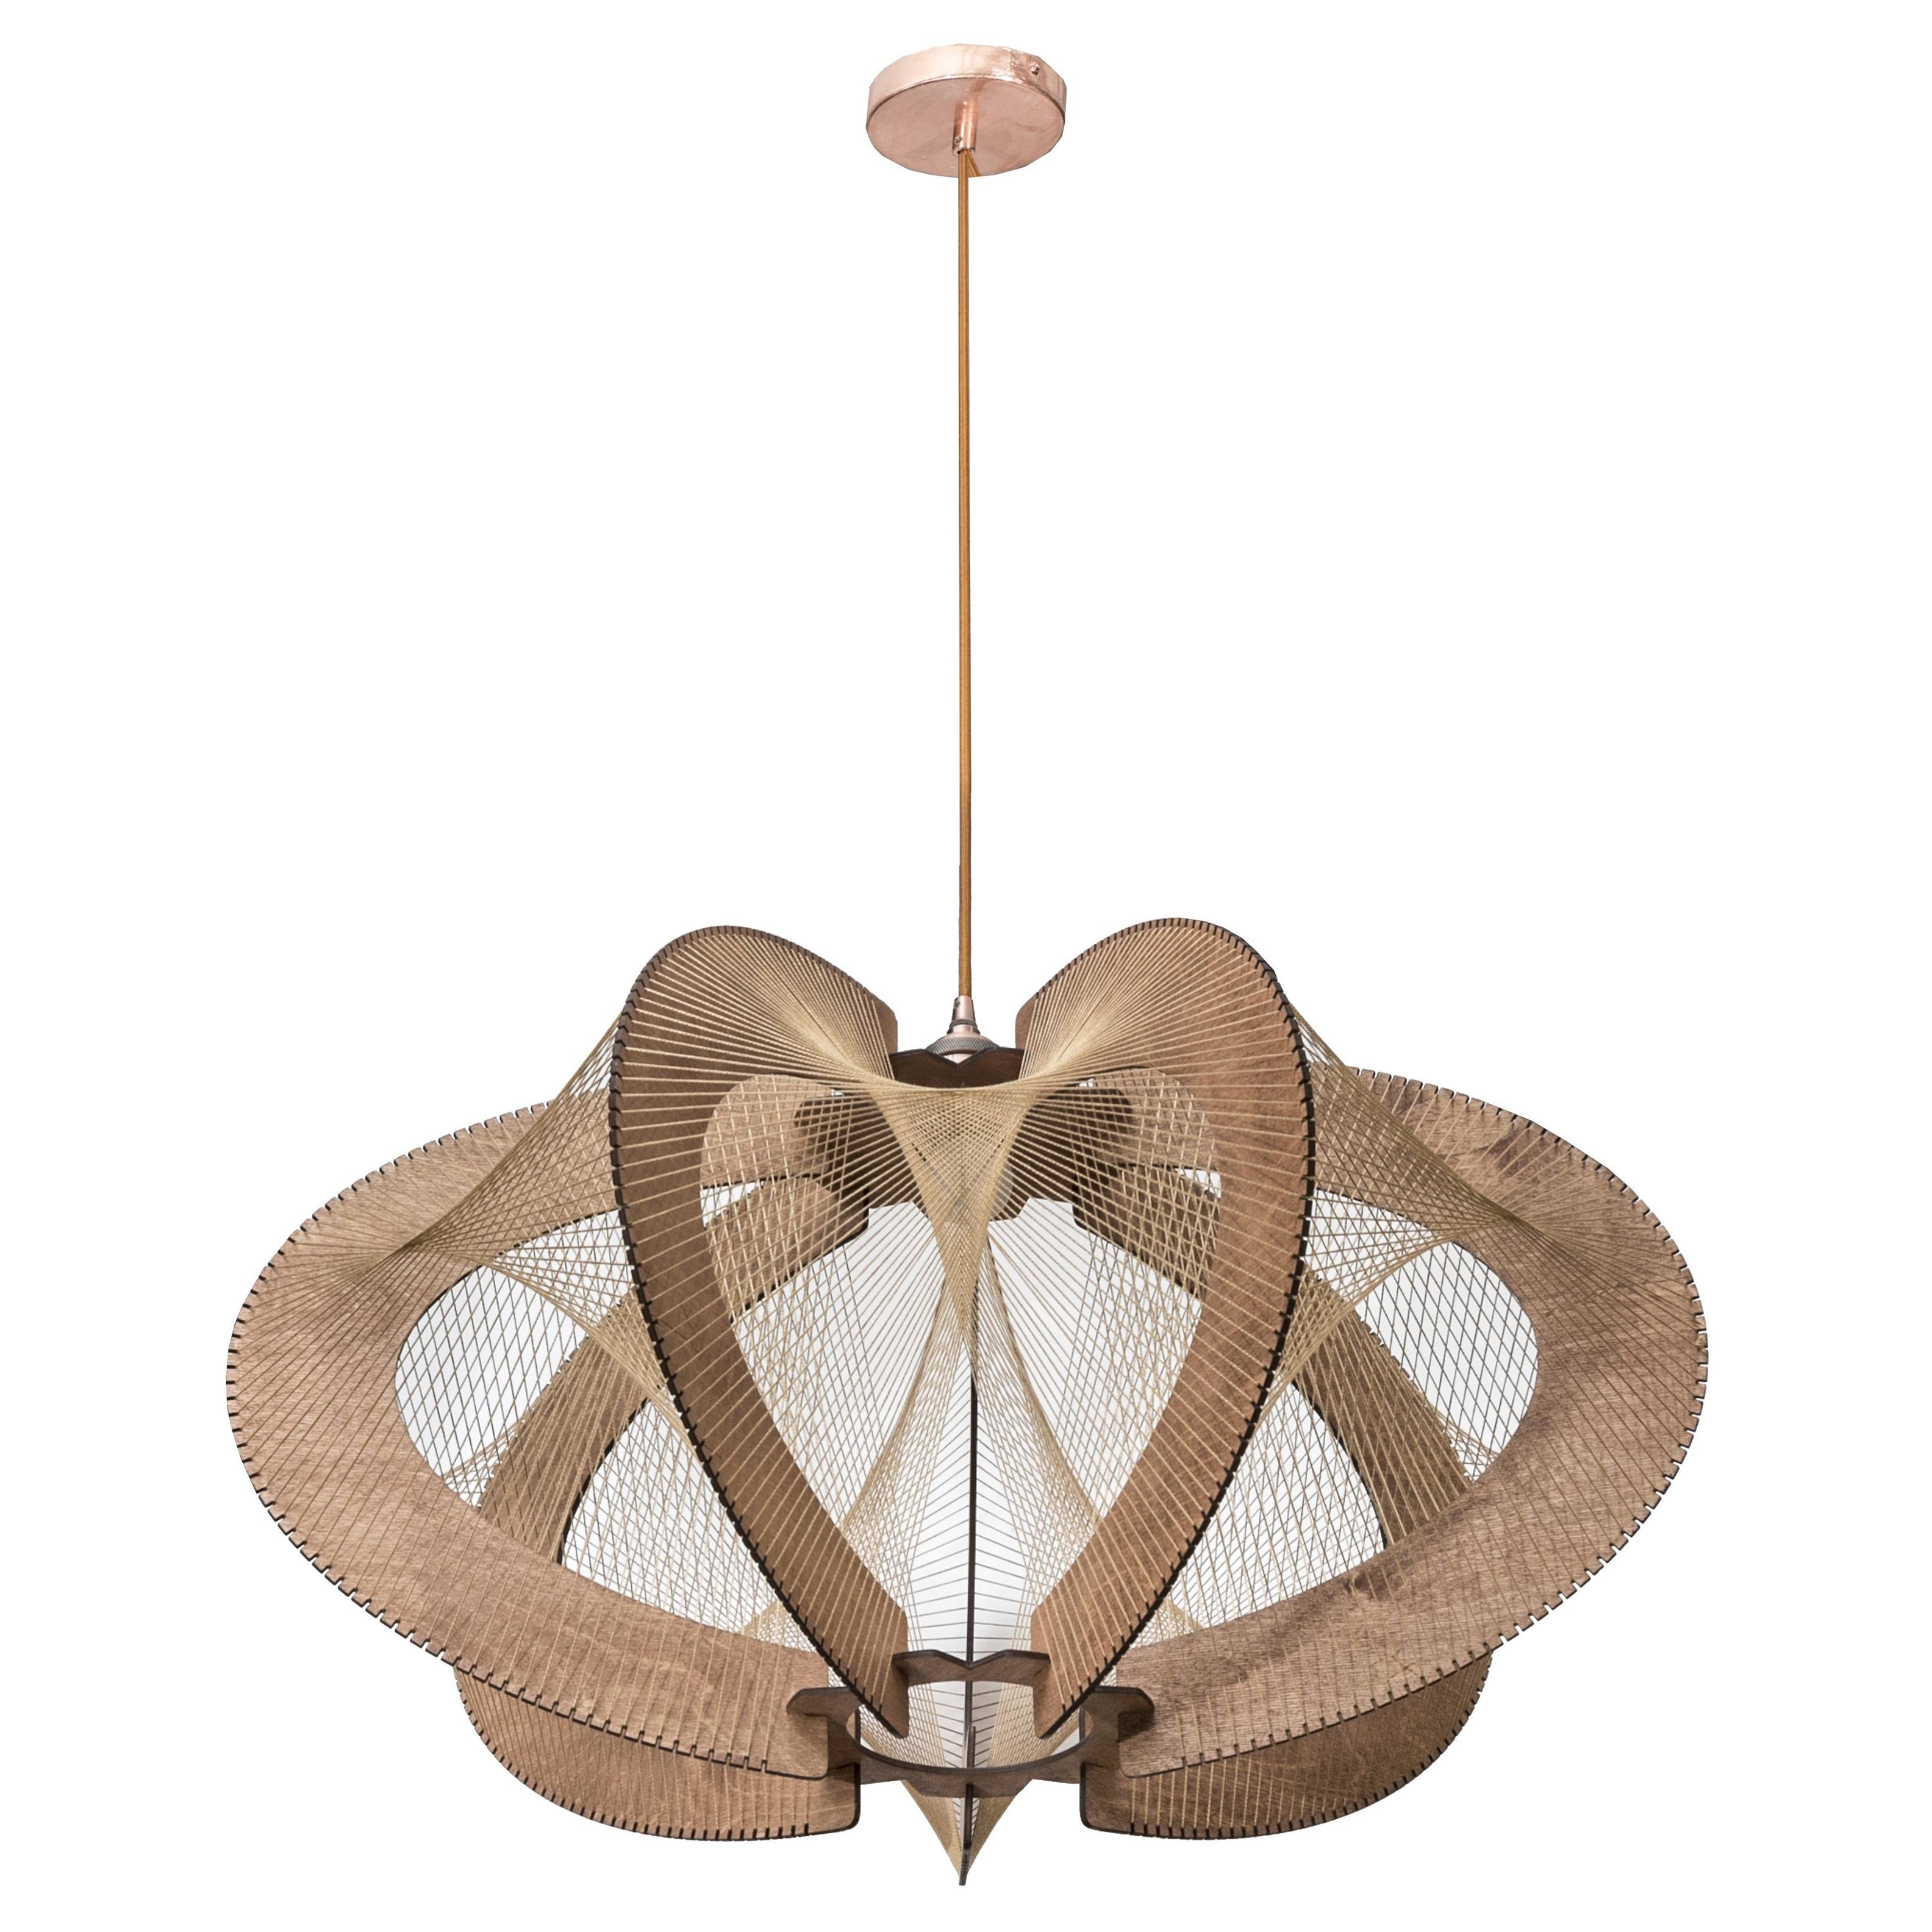 Elliptical modern suspensions in dark thin layers of wood circled by twine.

Several dimensions and shapes available. 

Dimensions given without the cord.